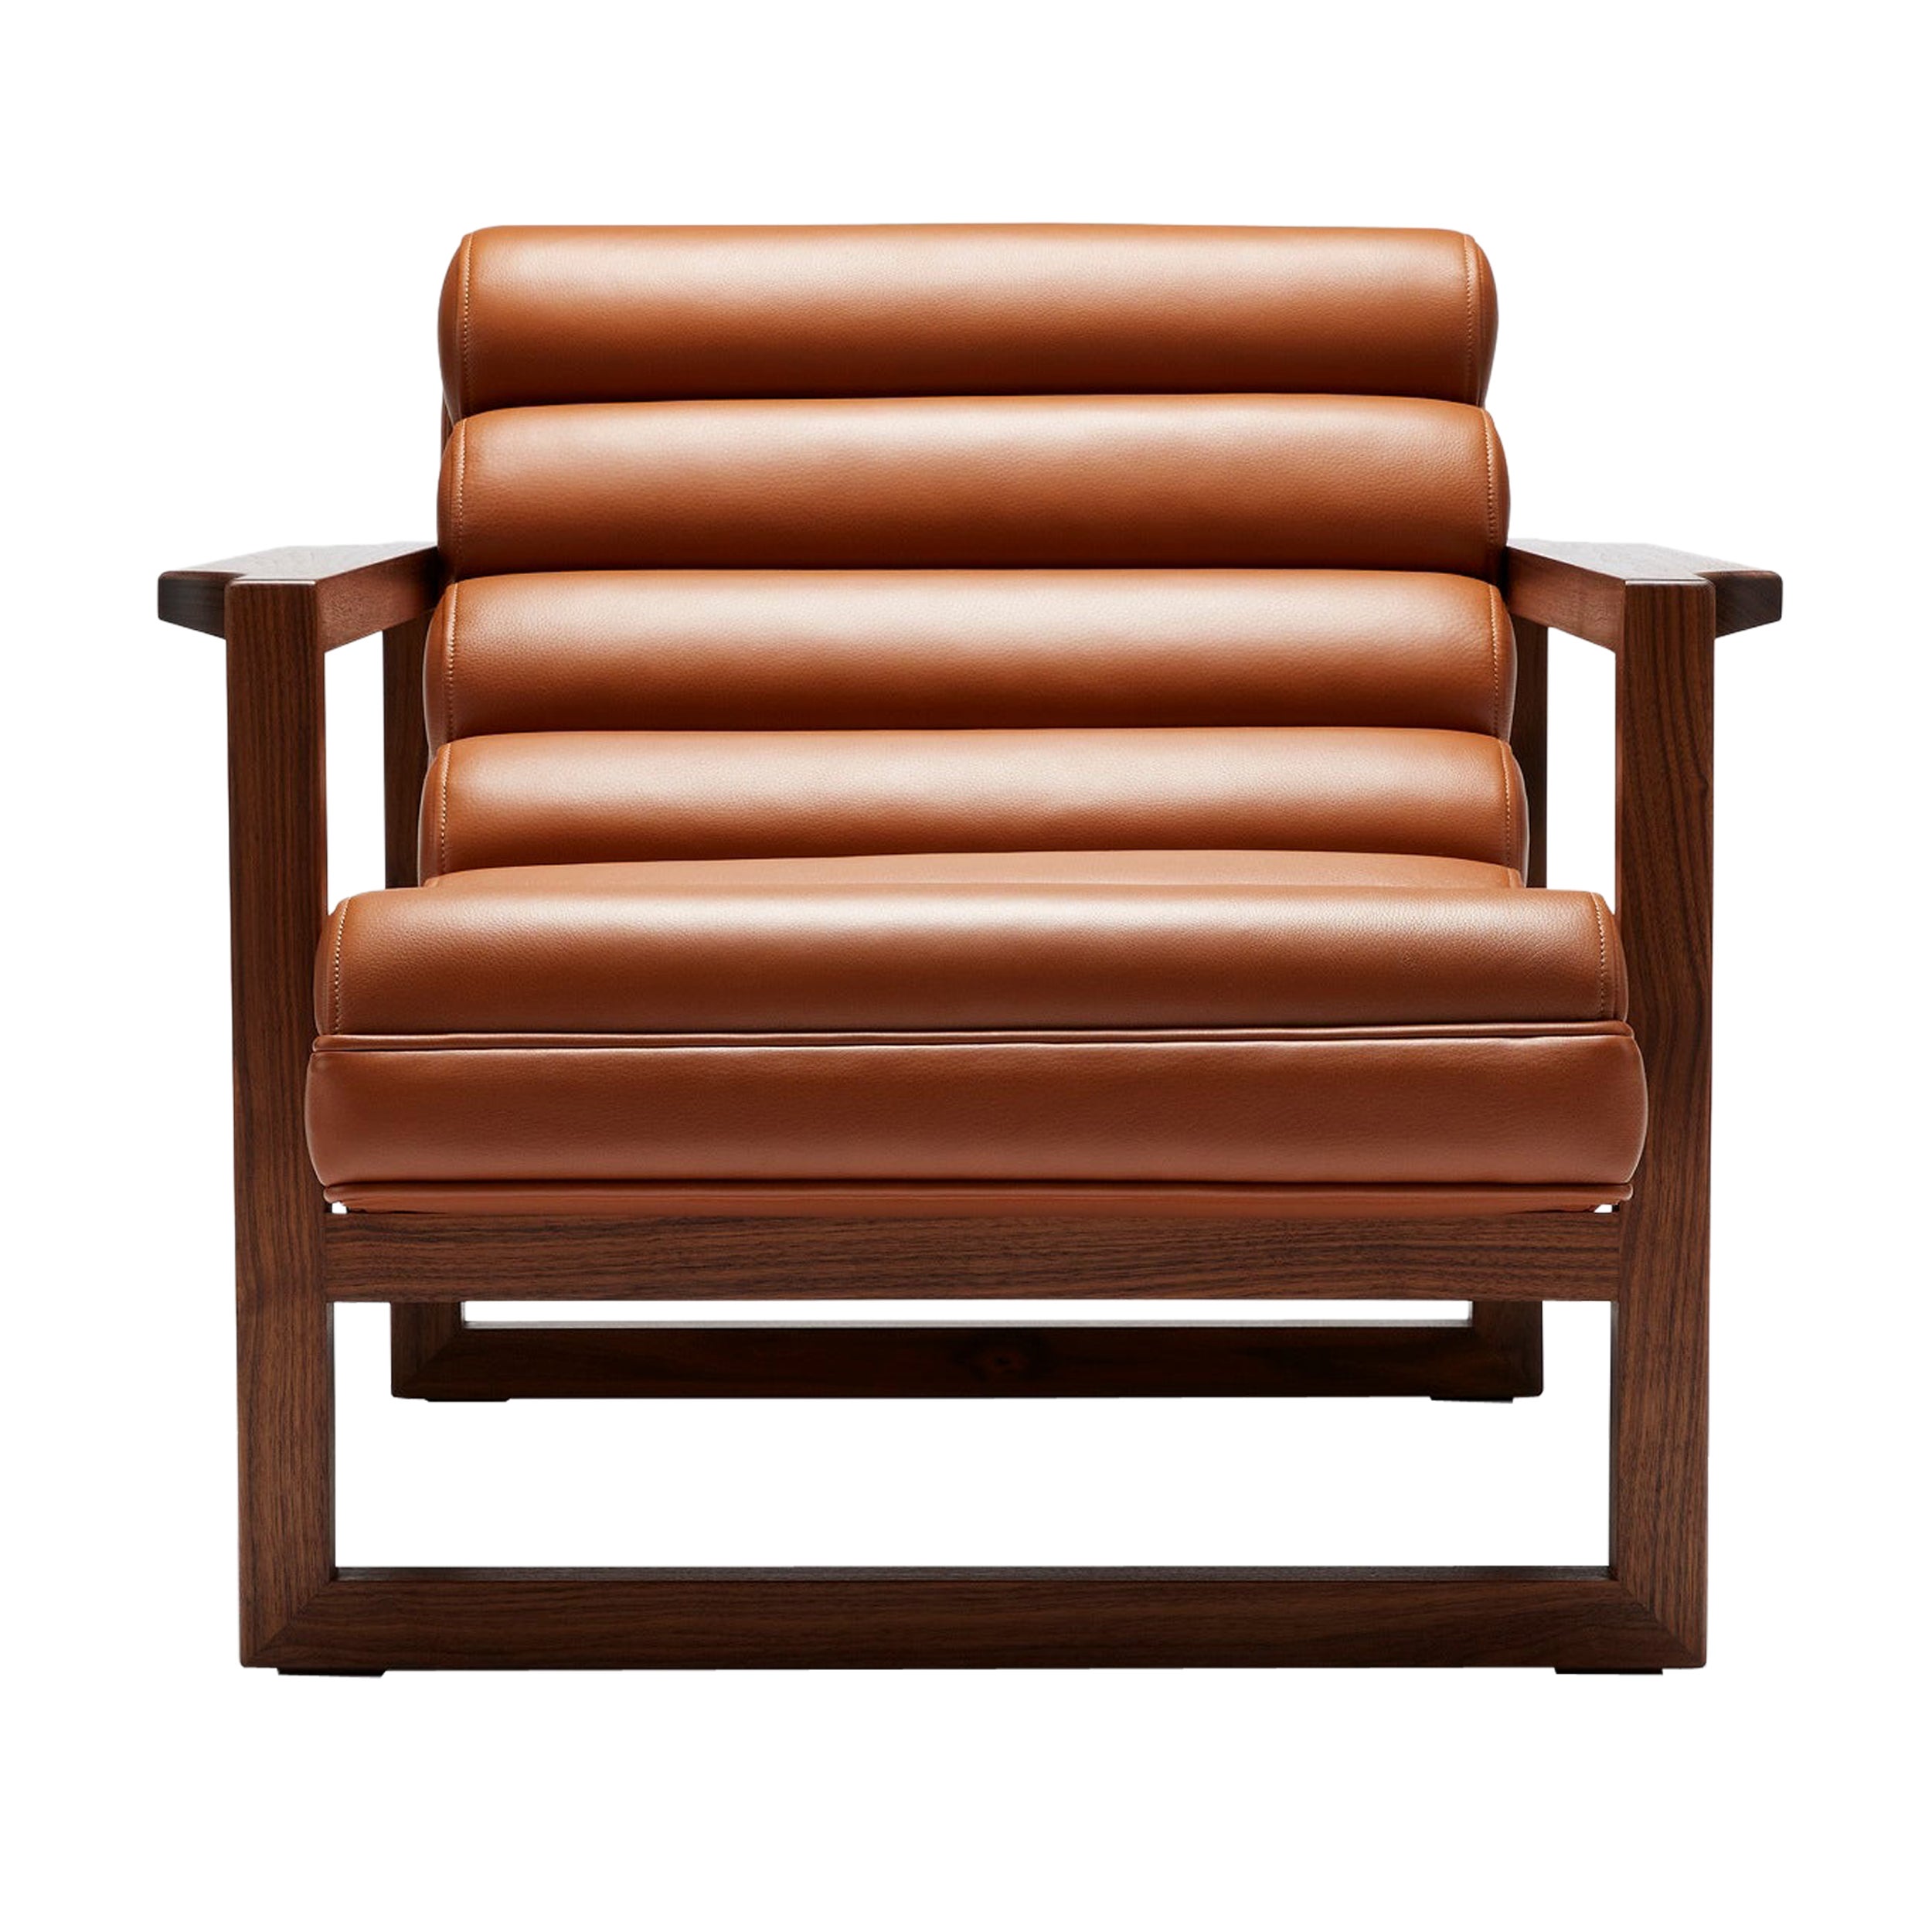 Contemporary Fluted Florence Easy Chair in Tan Leather and Oiled Walnut Frame